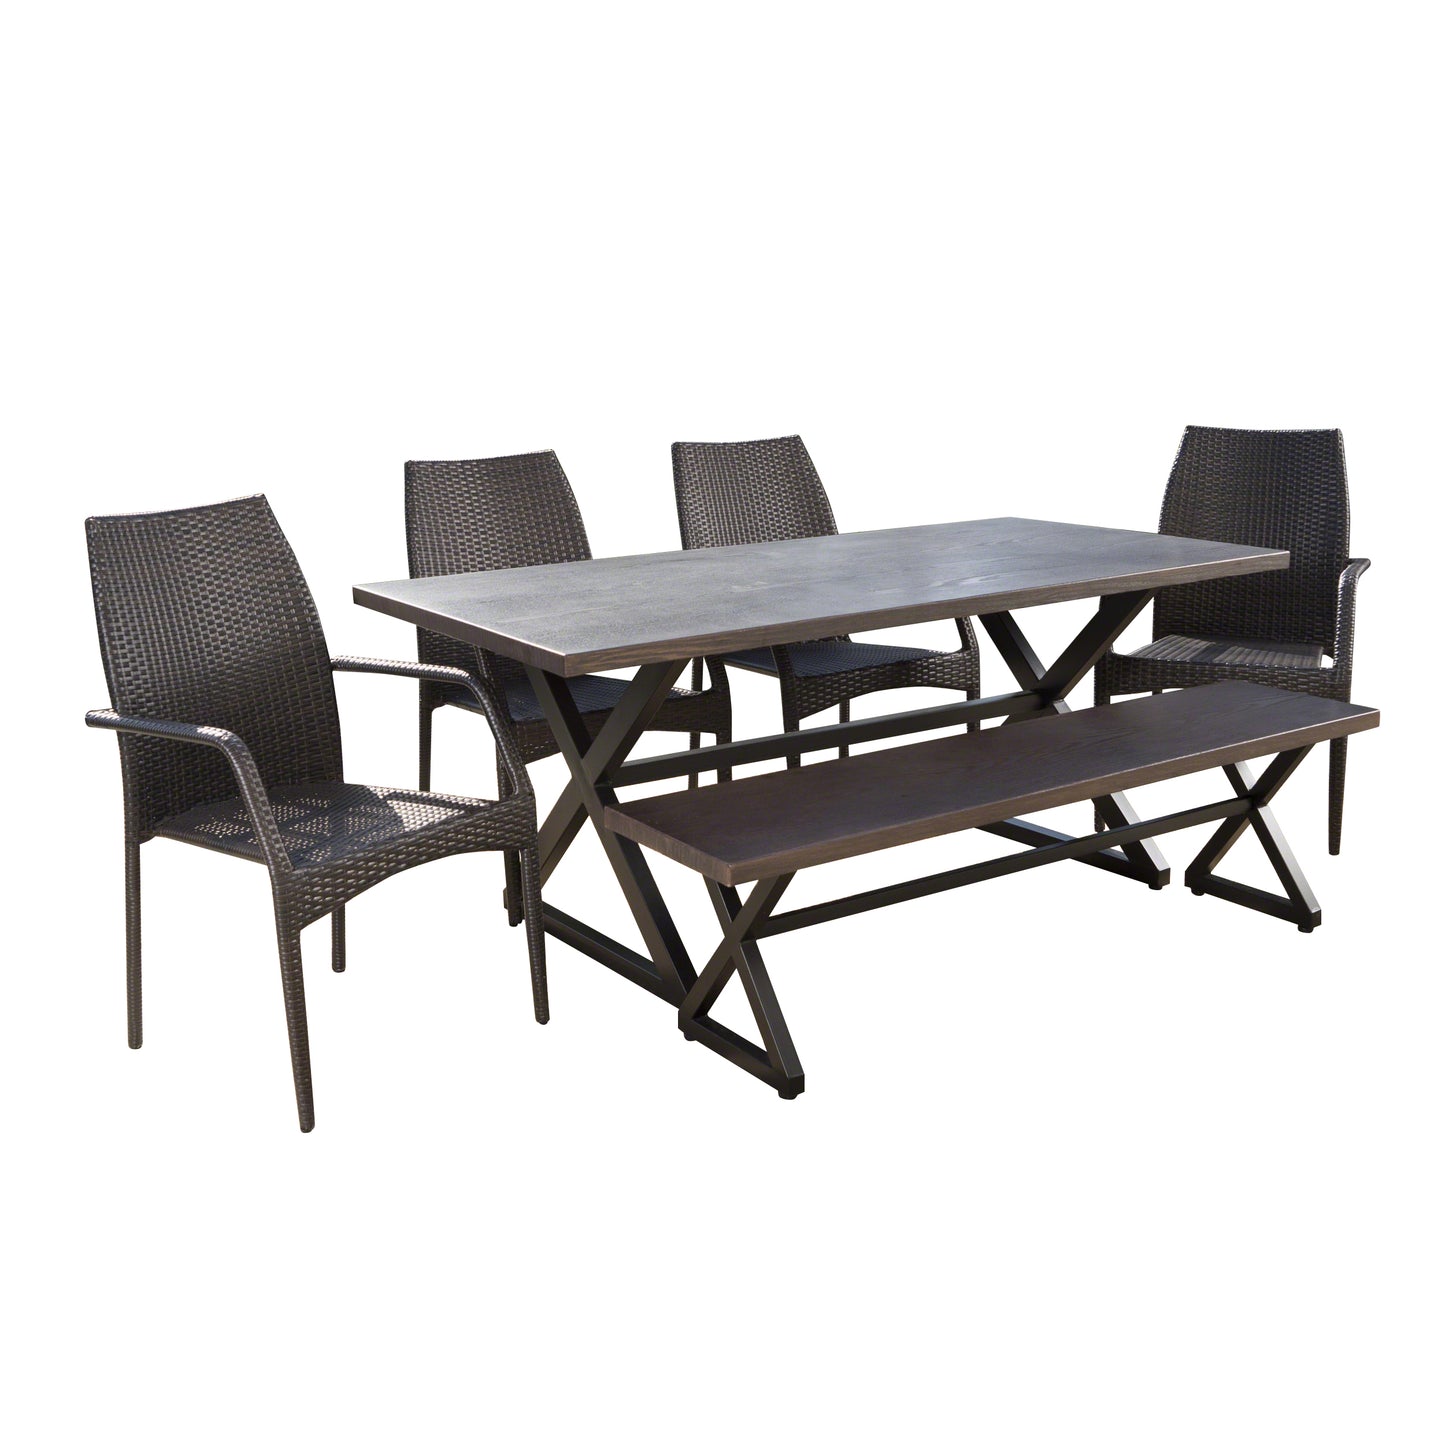 Cassandra Outdoor 6 Piece Brown Aluminum Dining Set with Bench and Wicker Chairs